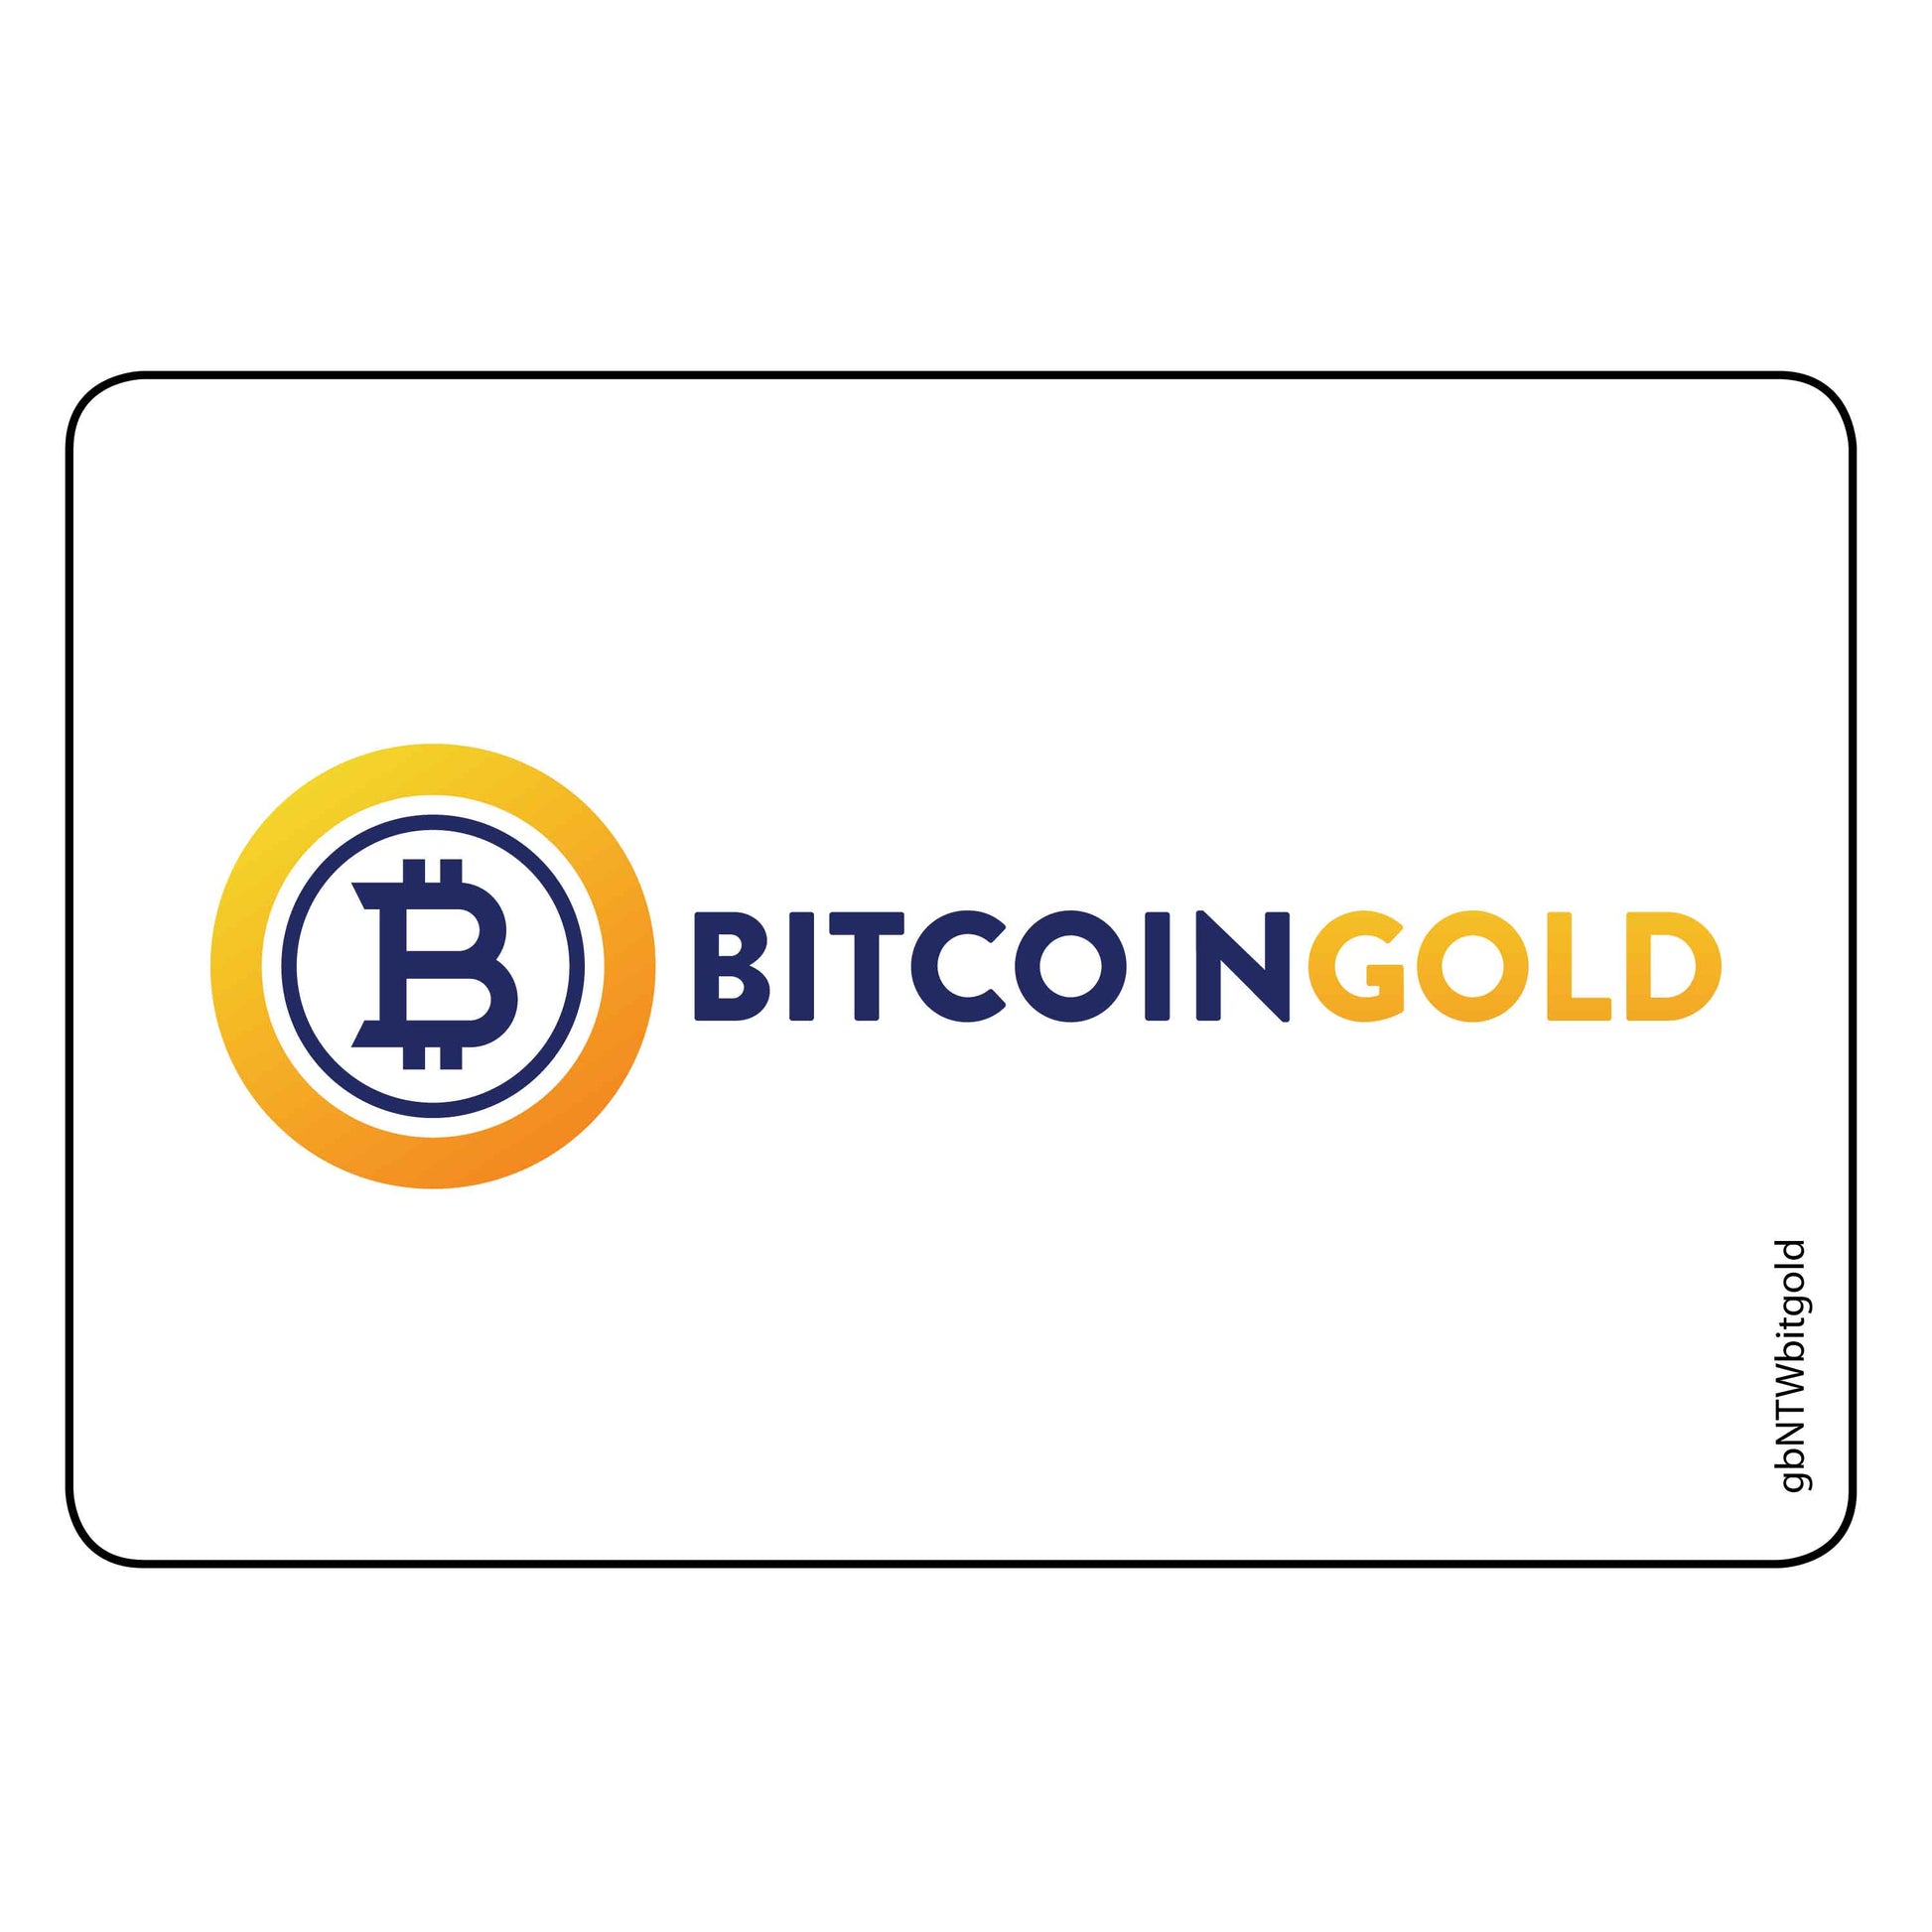 Single Network Decal, Bitcoin Gold Decal. 3 inches by 2 inches in size.